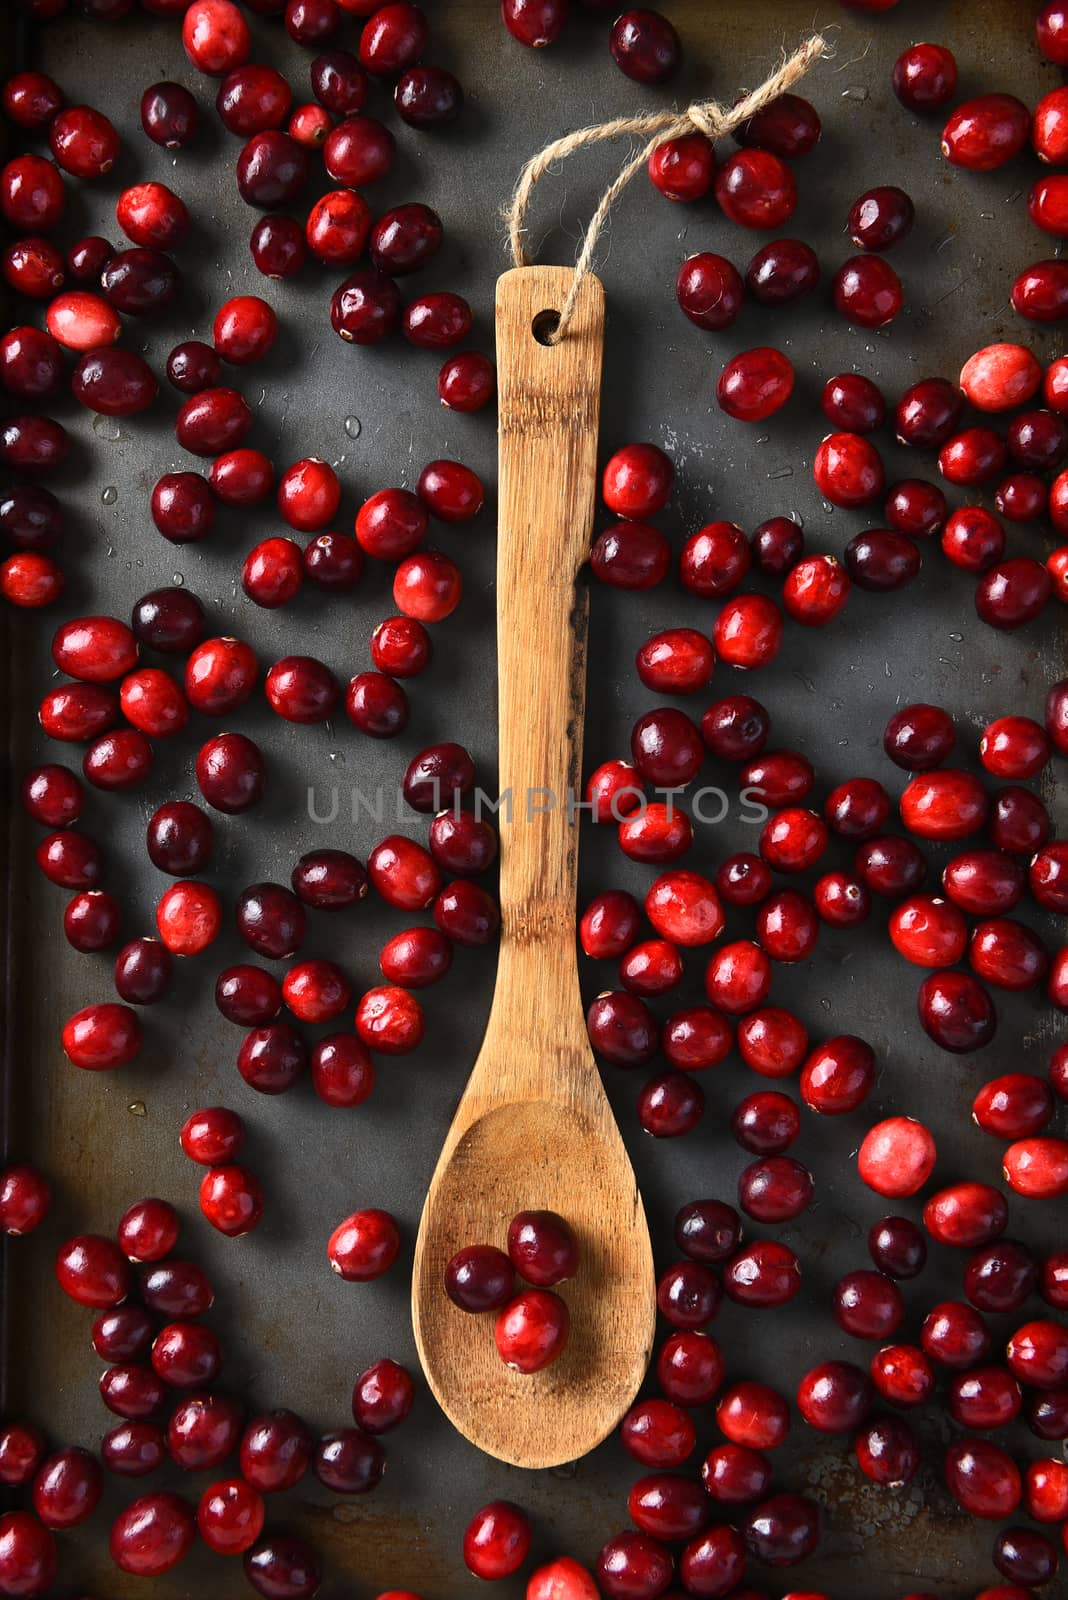 Cranberries and Wooden Spoon by sCukrov